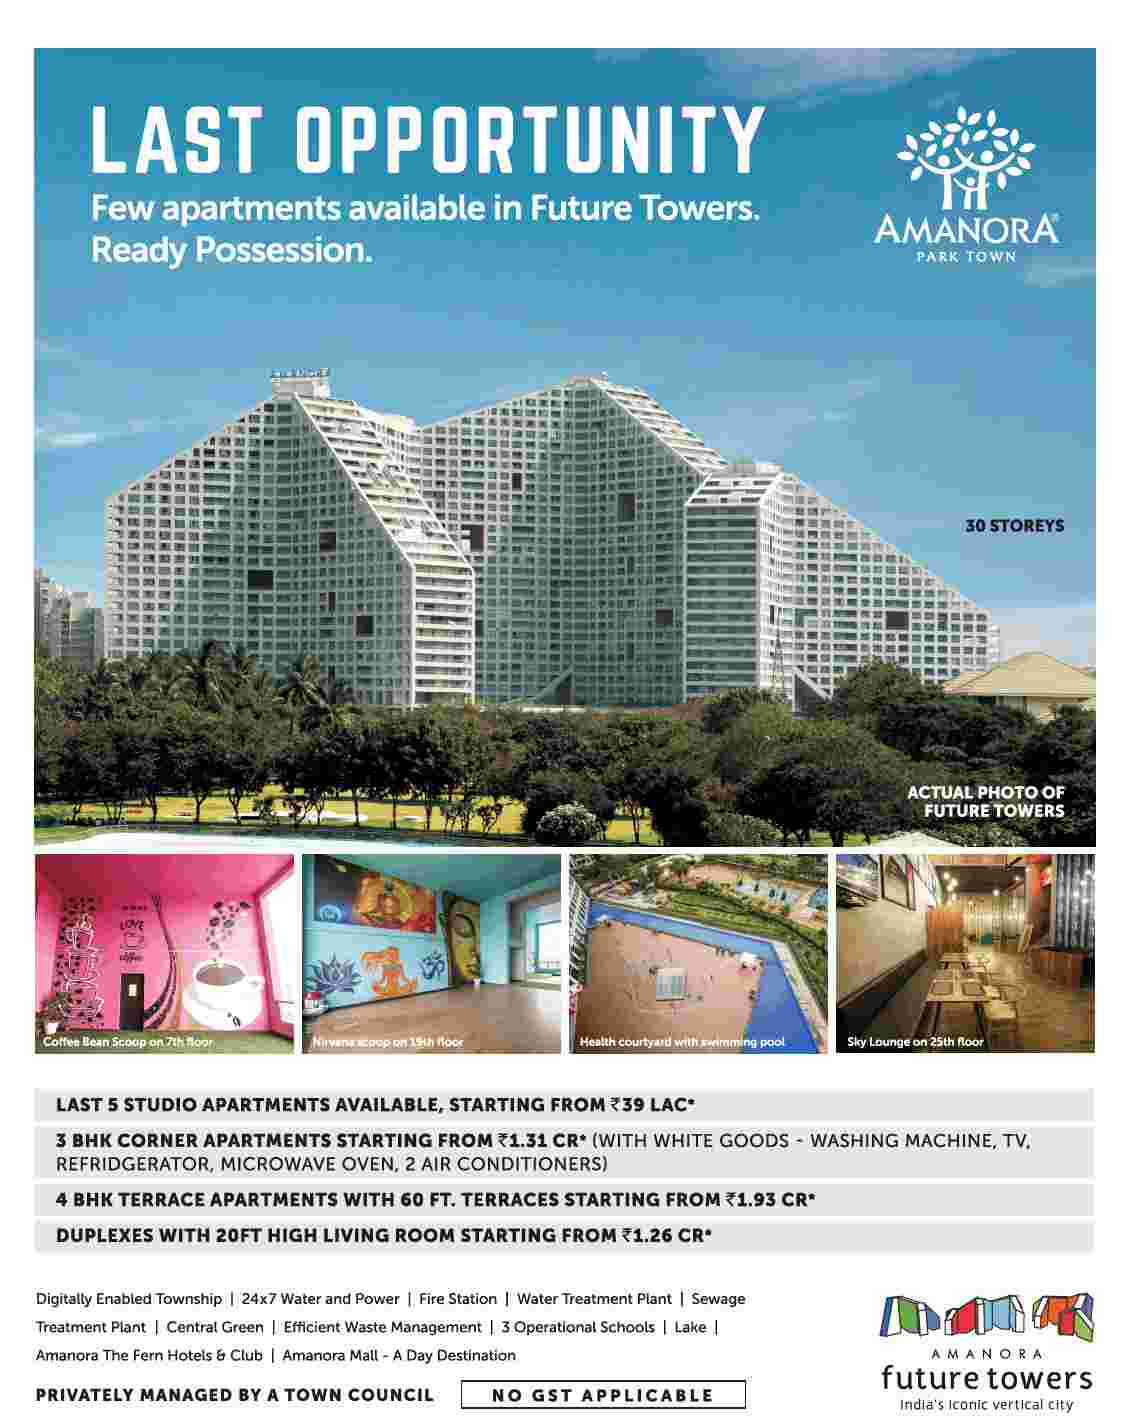 Last opportunity to book ready possession apartments in Amanora Future Towers in Pune Update